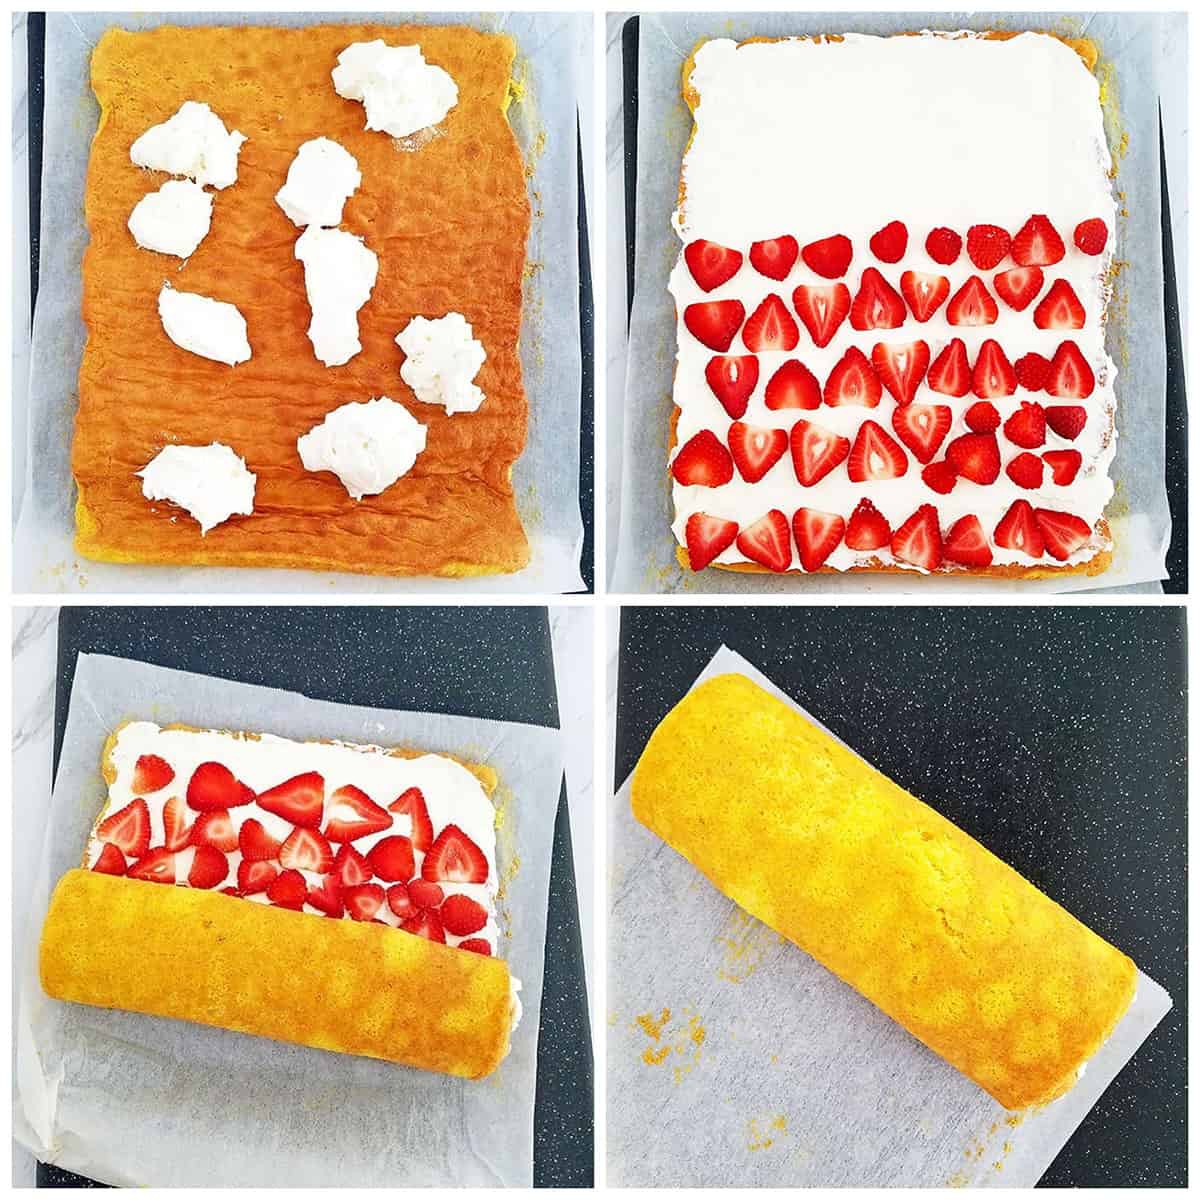 Spread of the cream onto the cake sponge evenly using an offset spatula, and then lay out sliced strawberries over the cream.